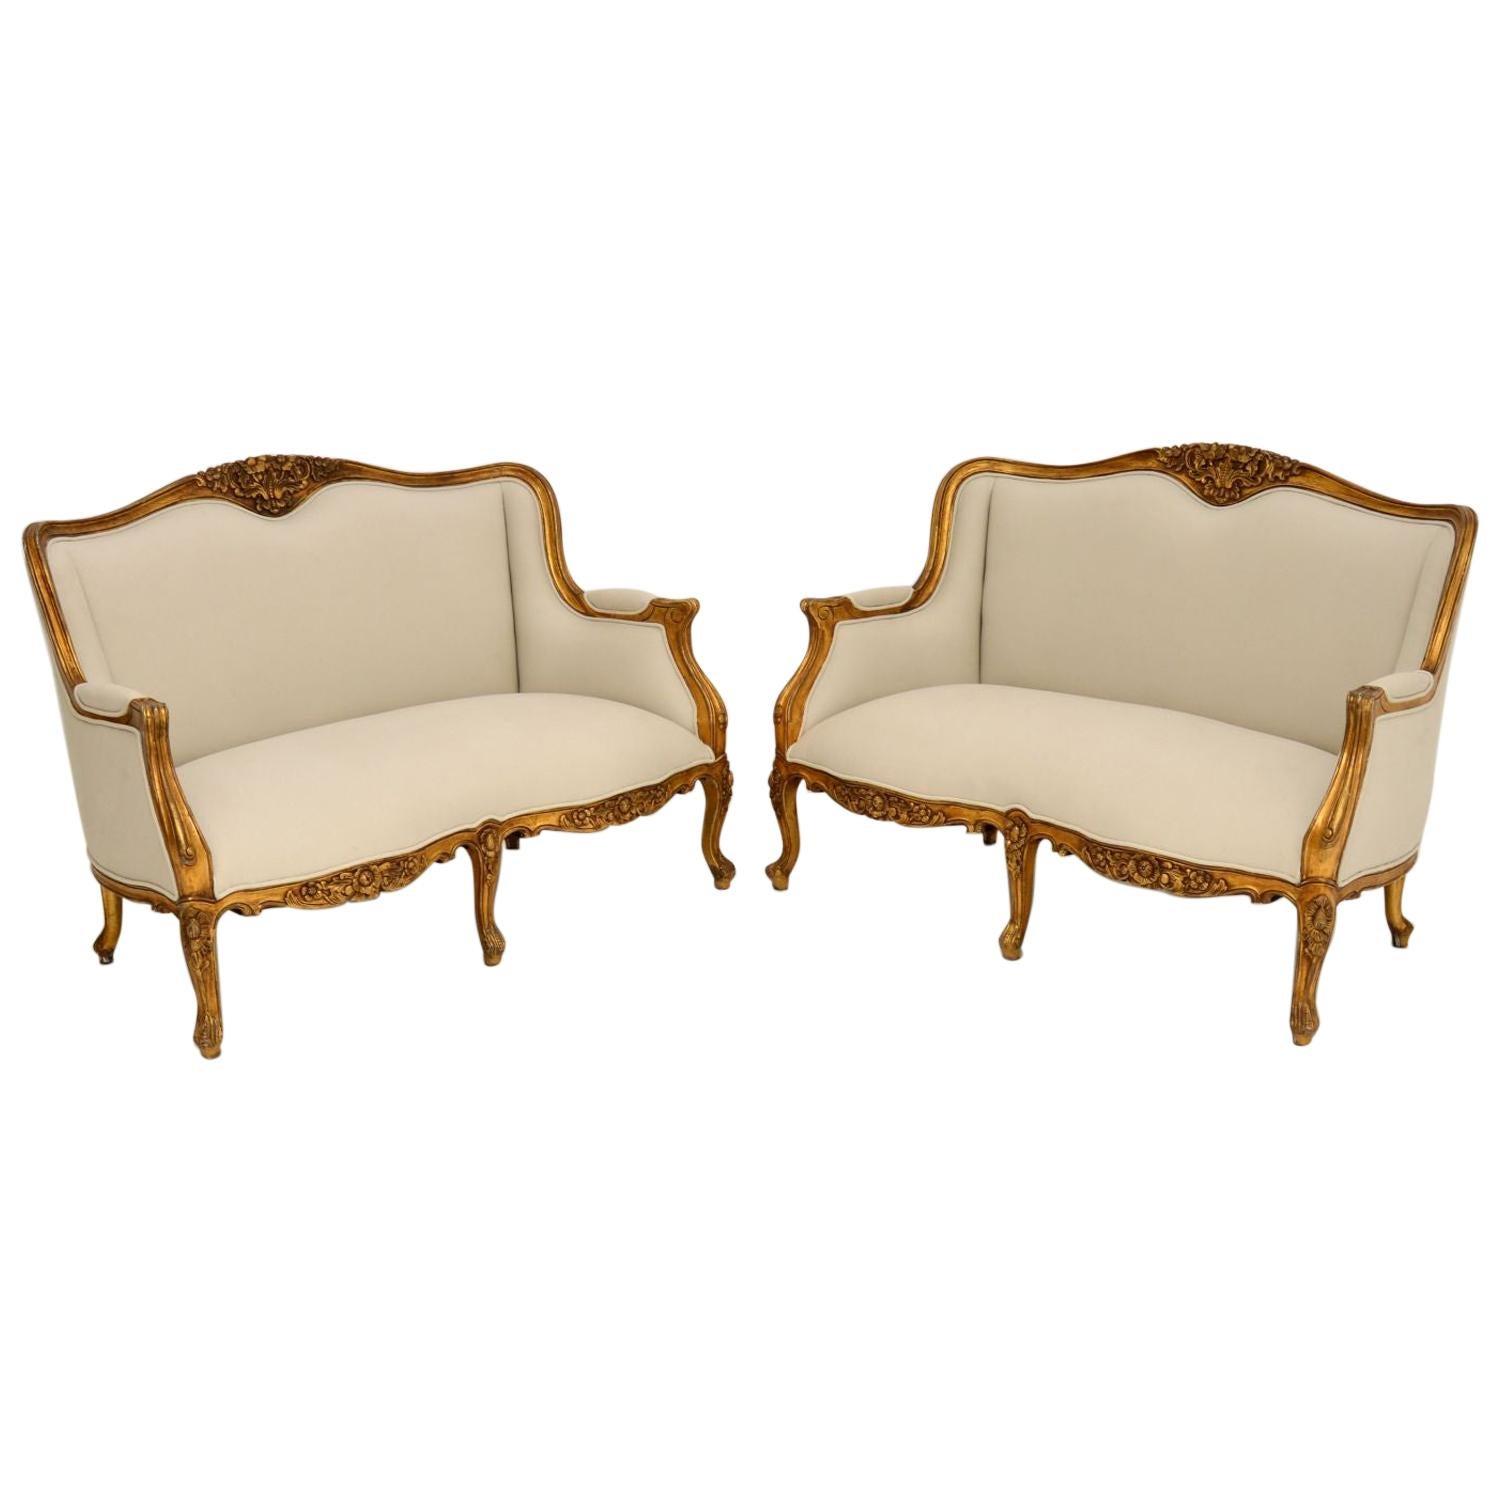 Pair of Antique French Gilt Wood Sofas